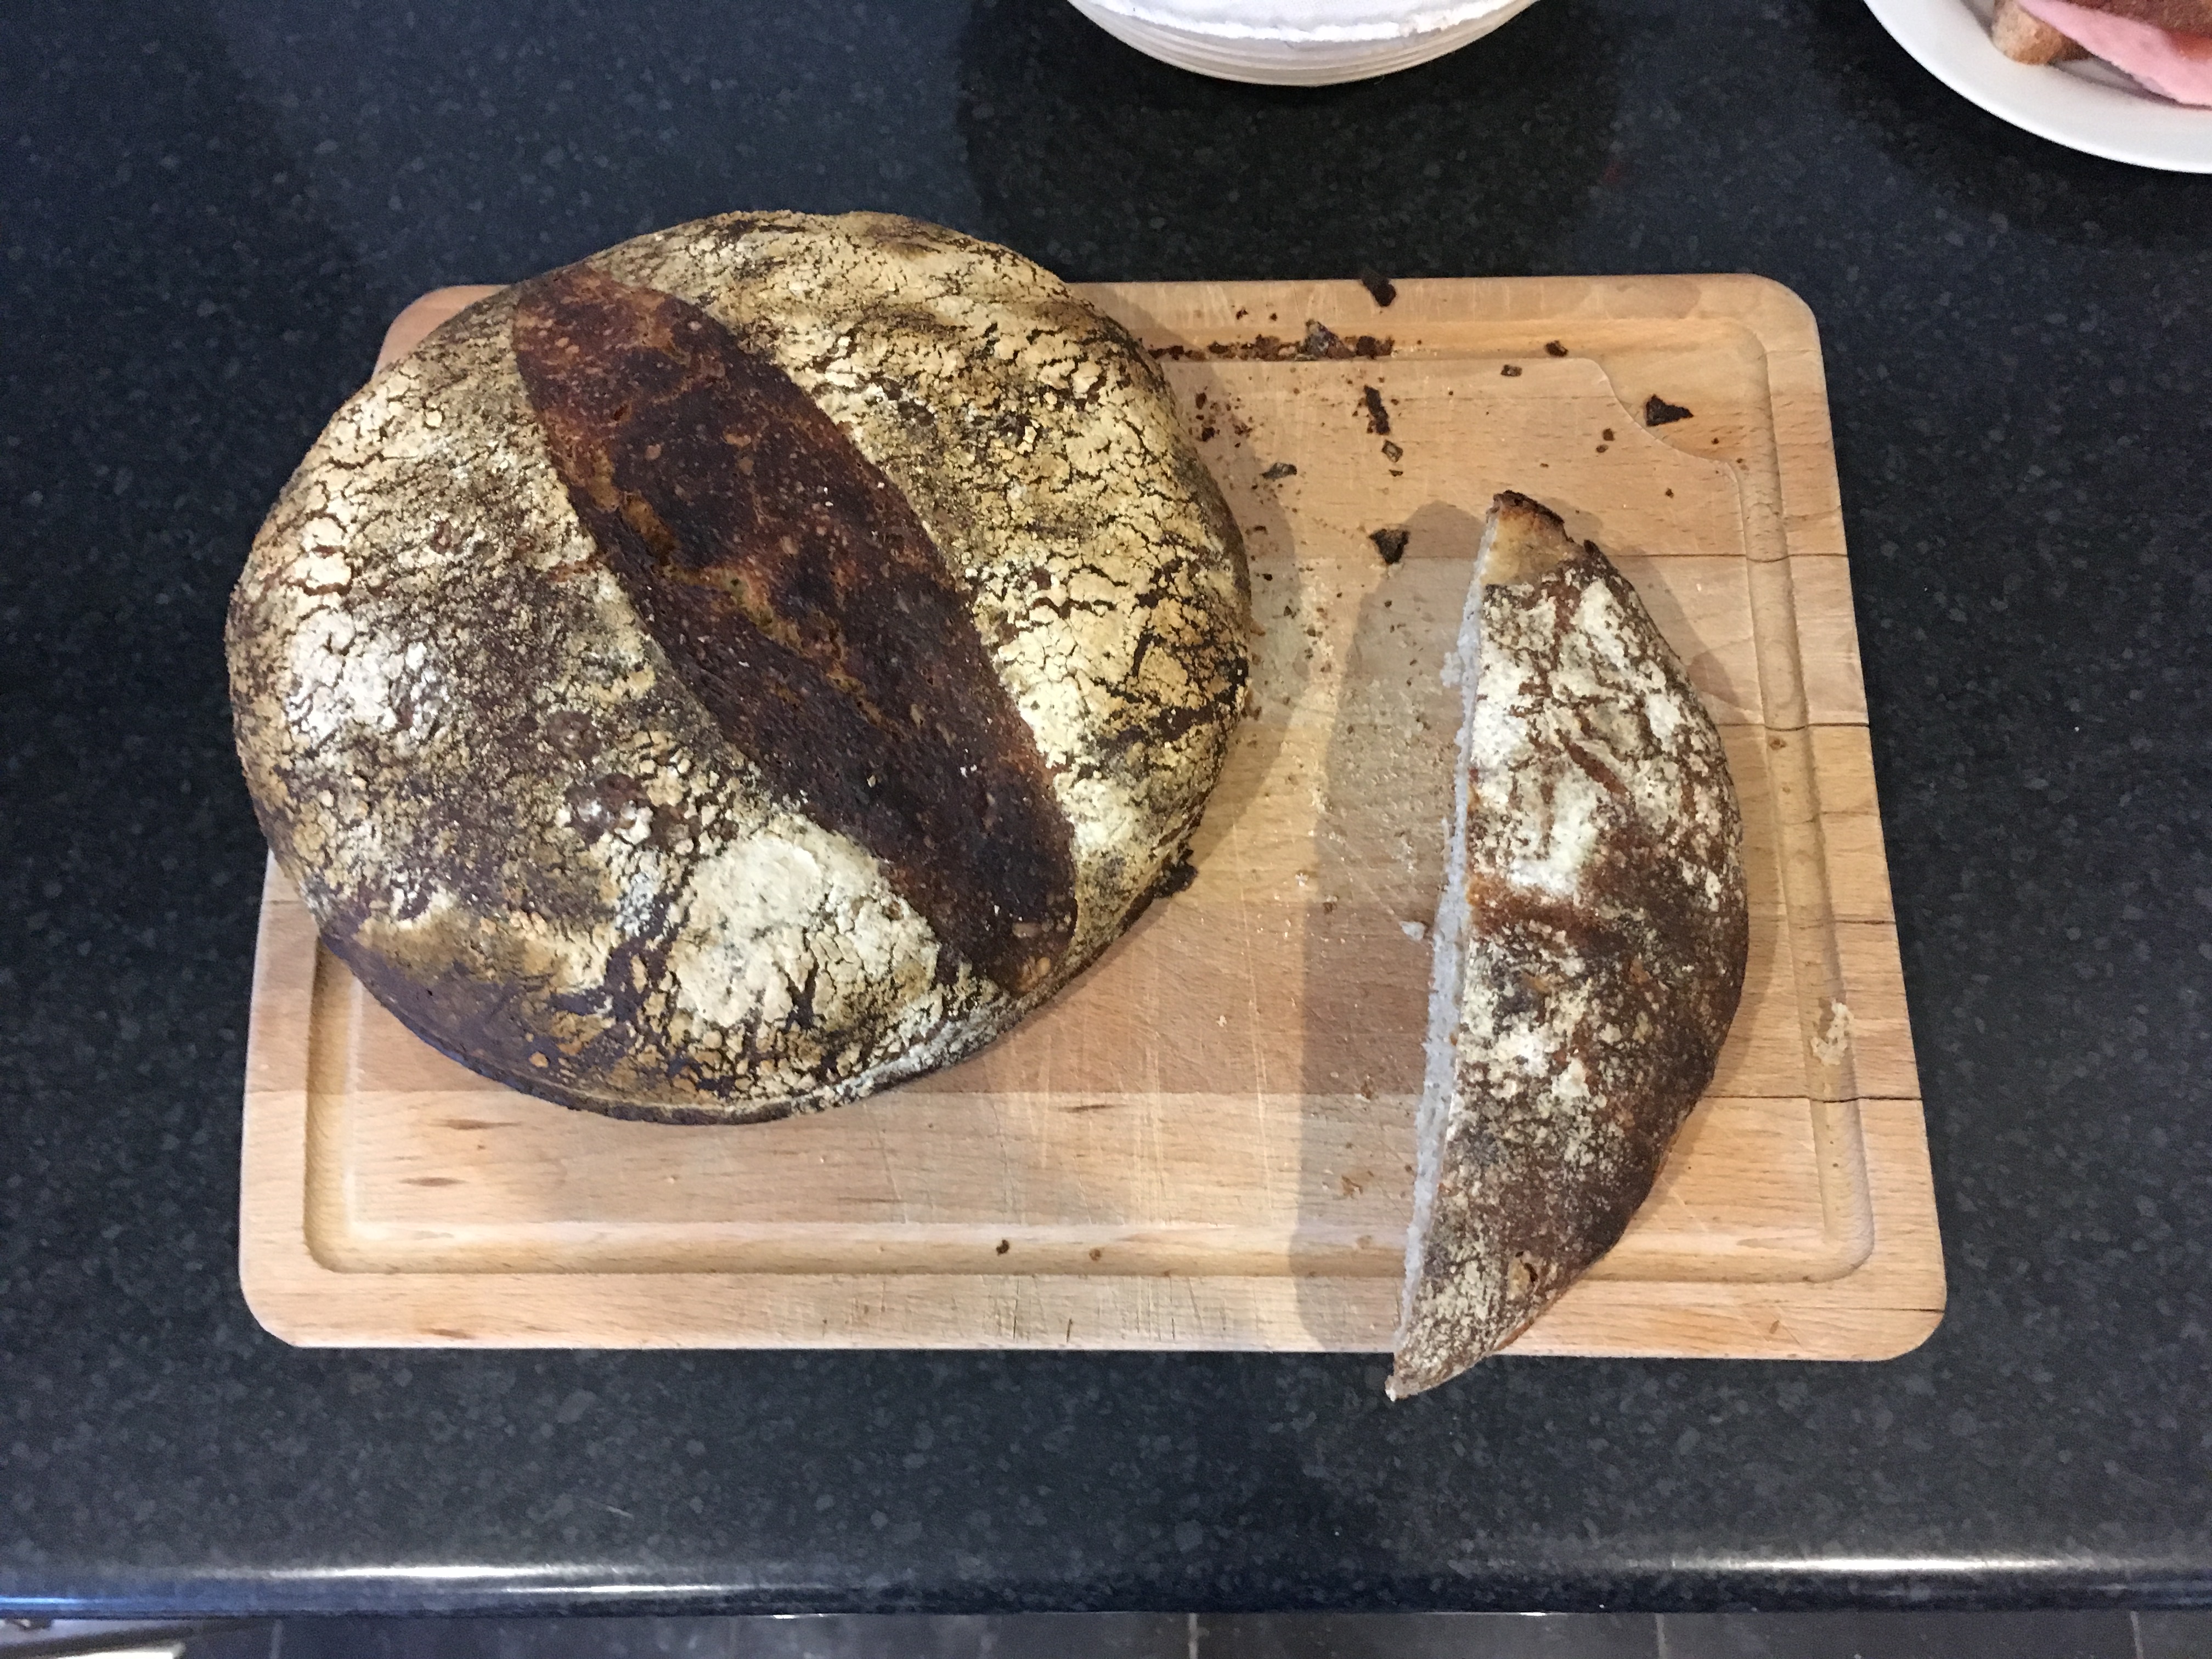 An image of a bread called “Lodge Sourdough”